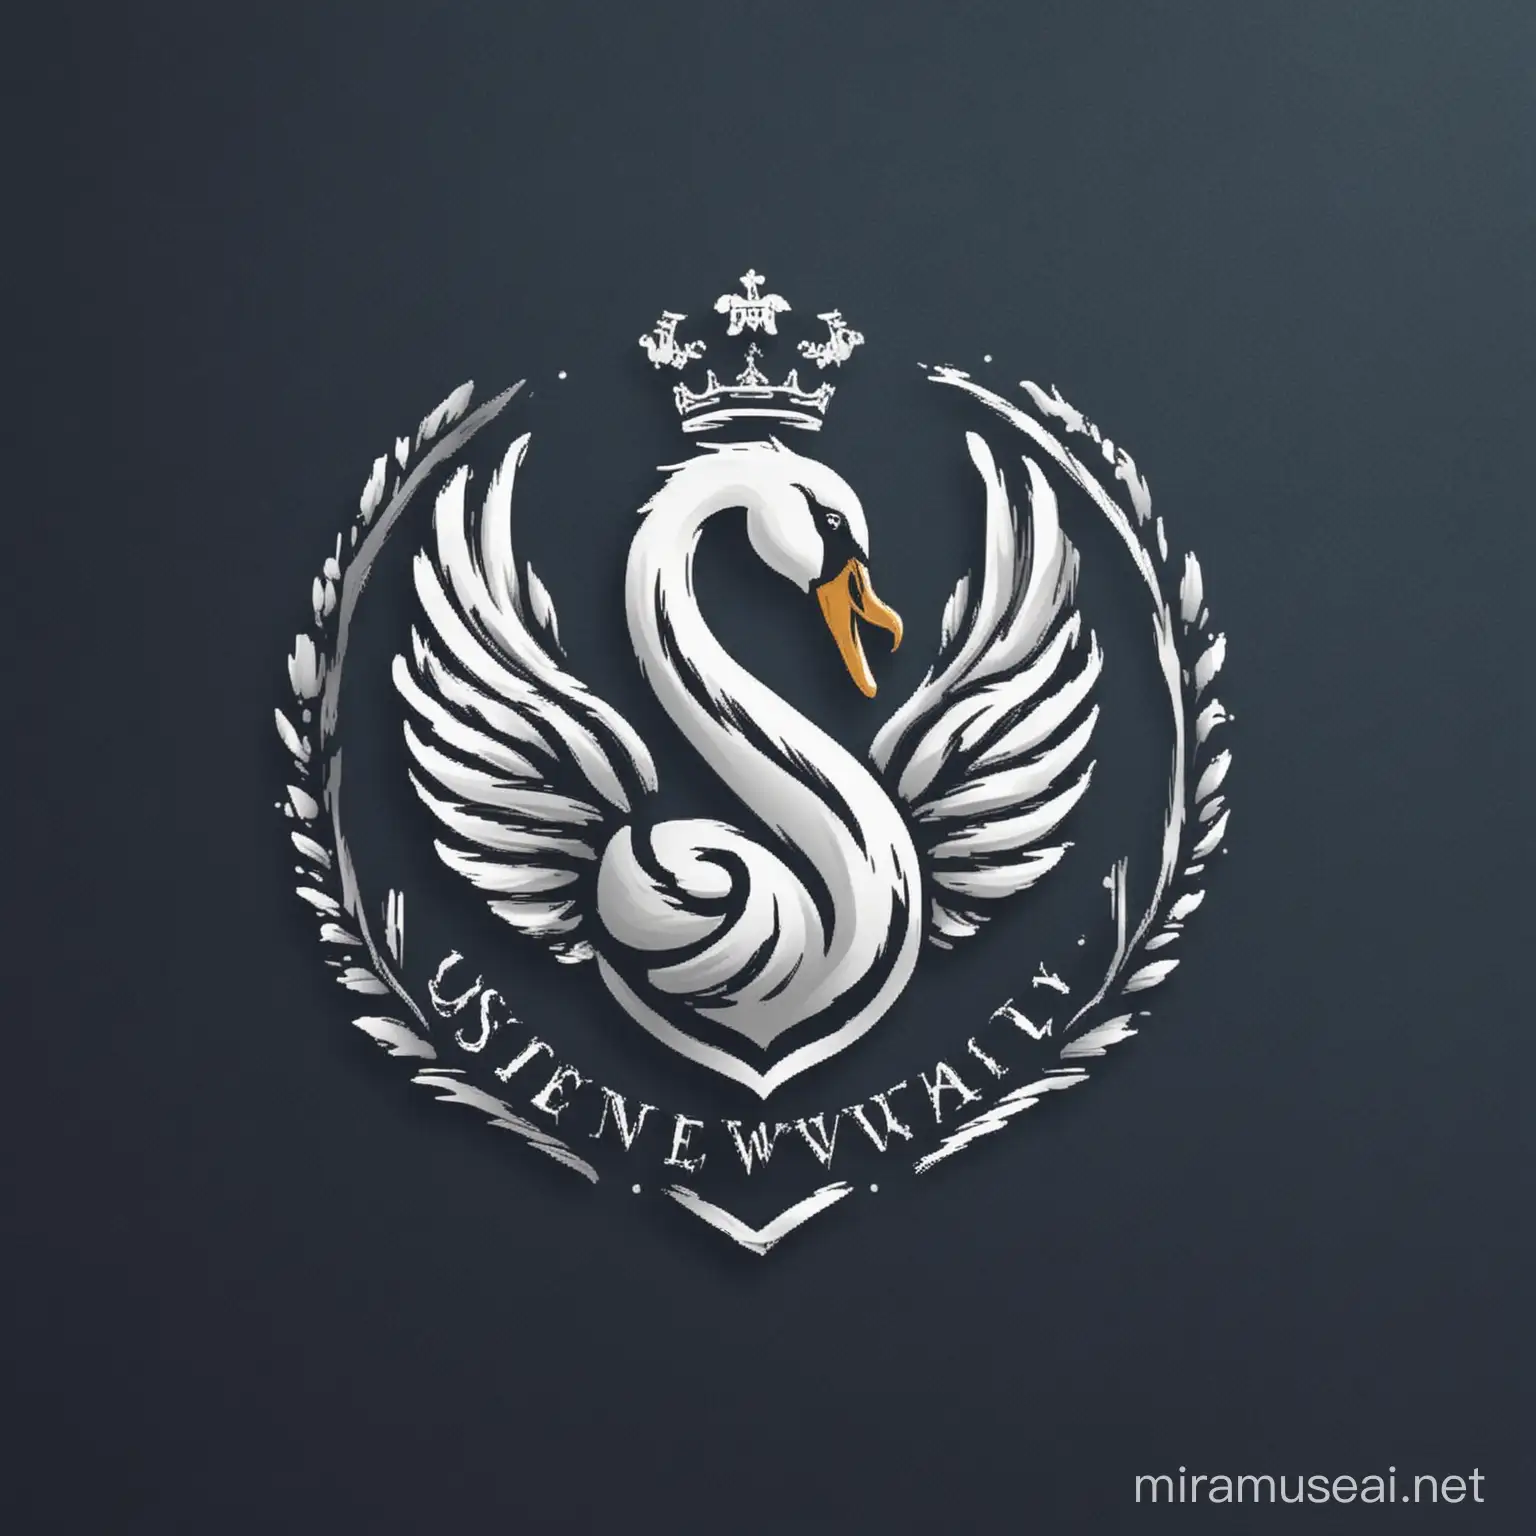 create a logo for a university with swan as the main element, 